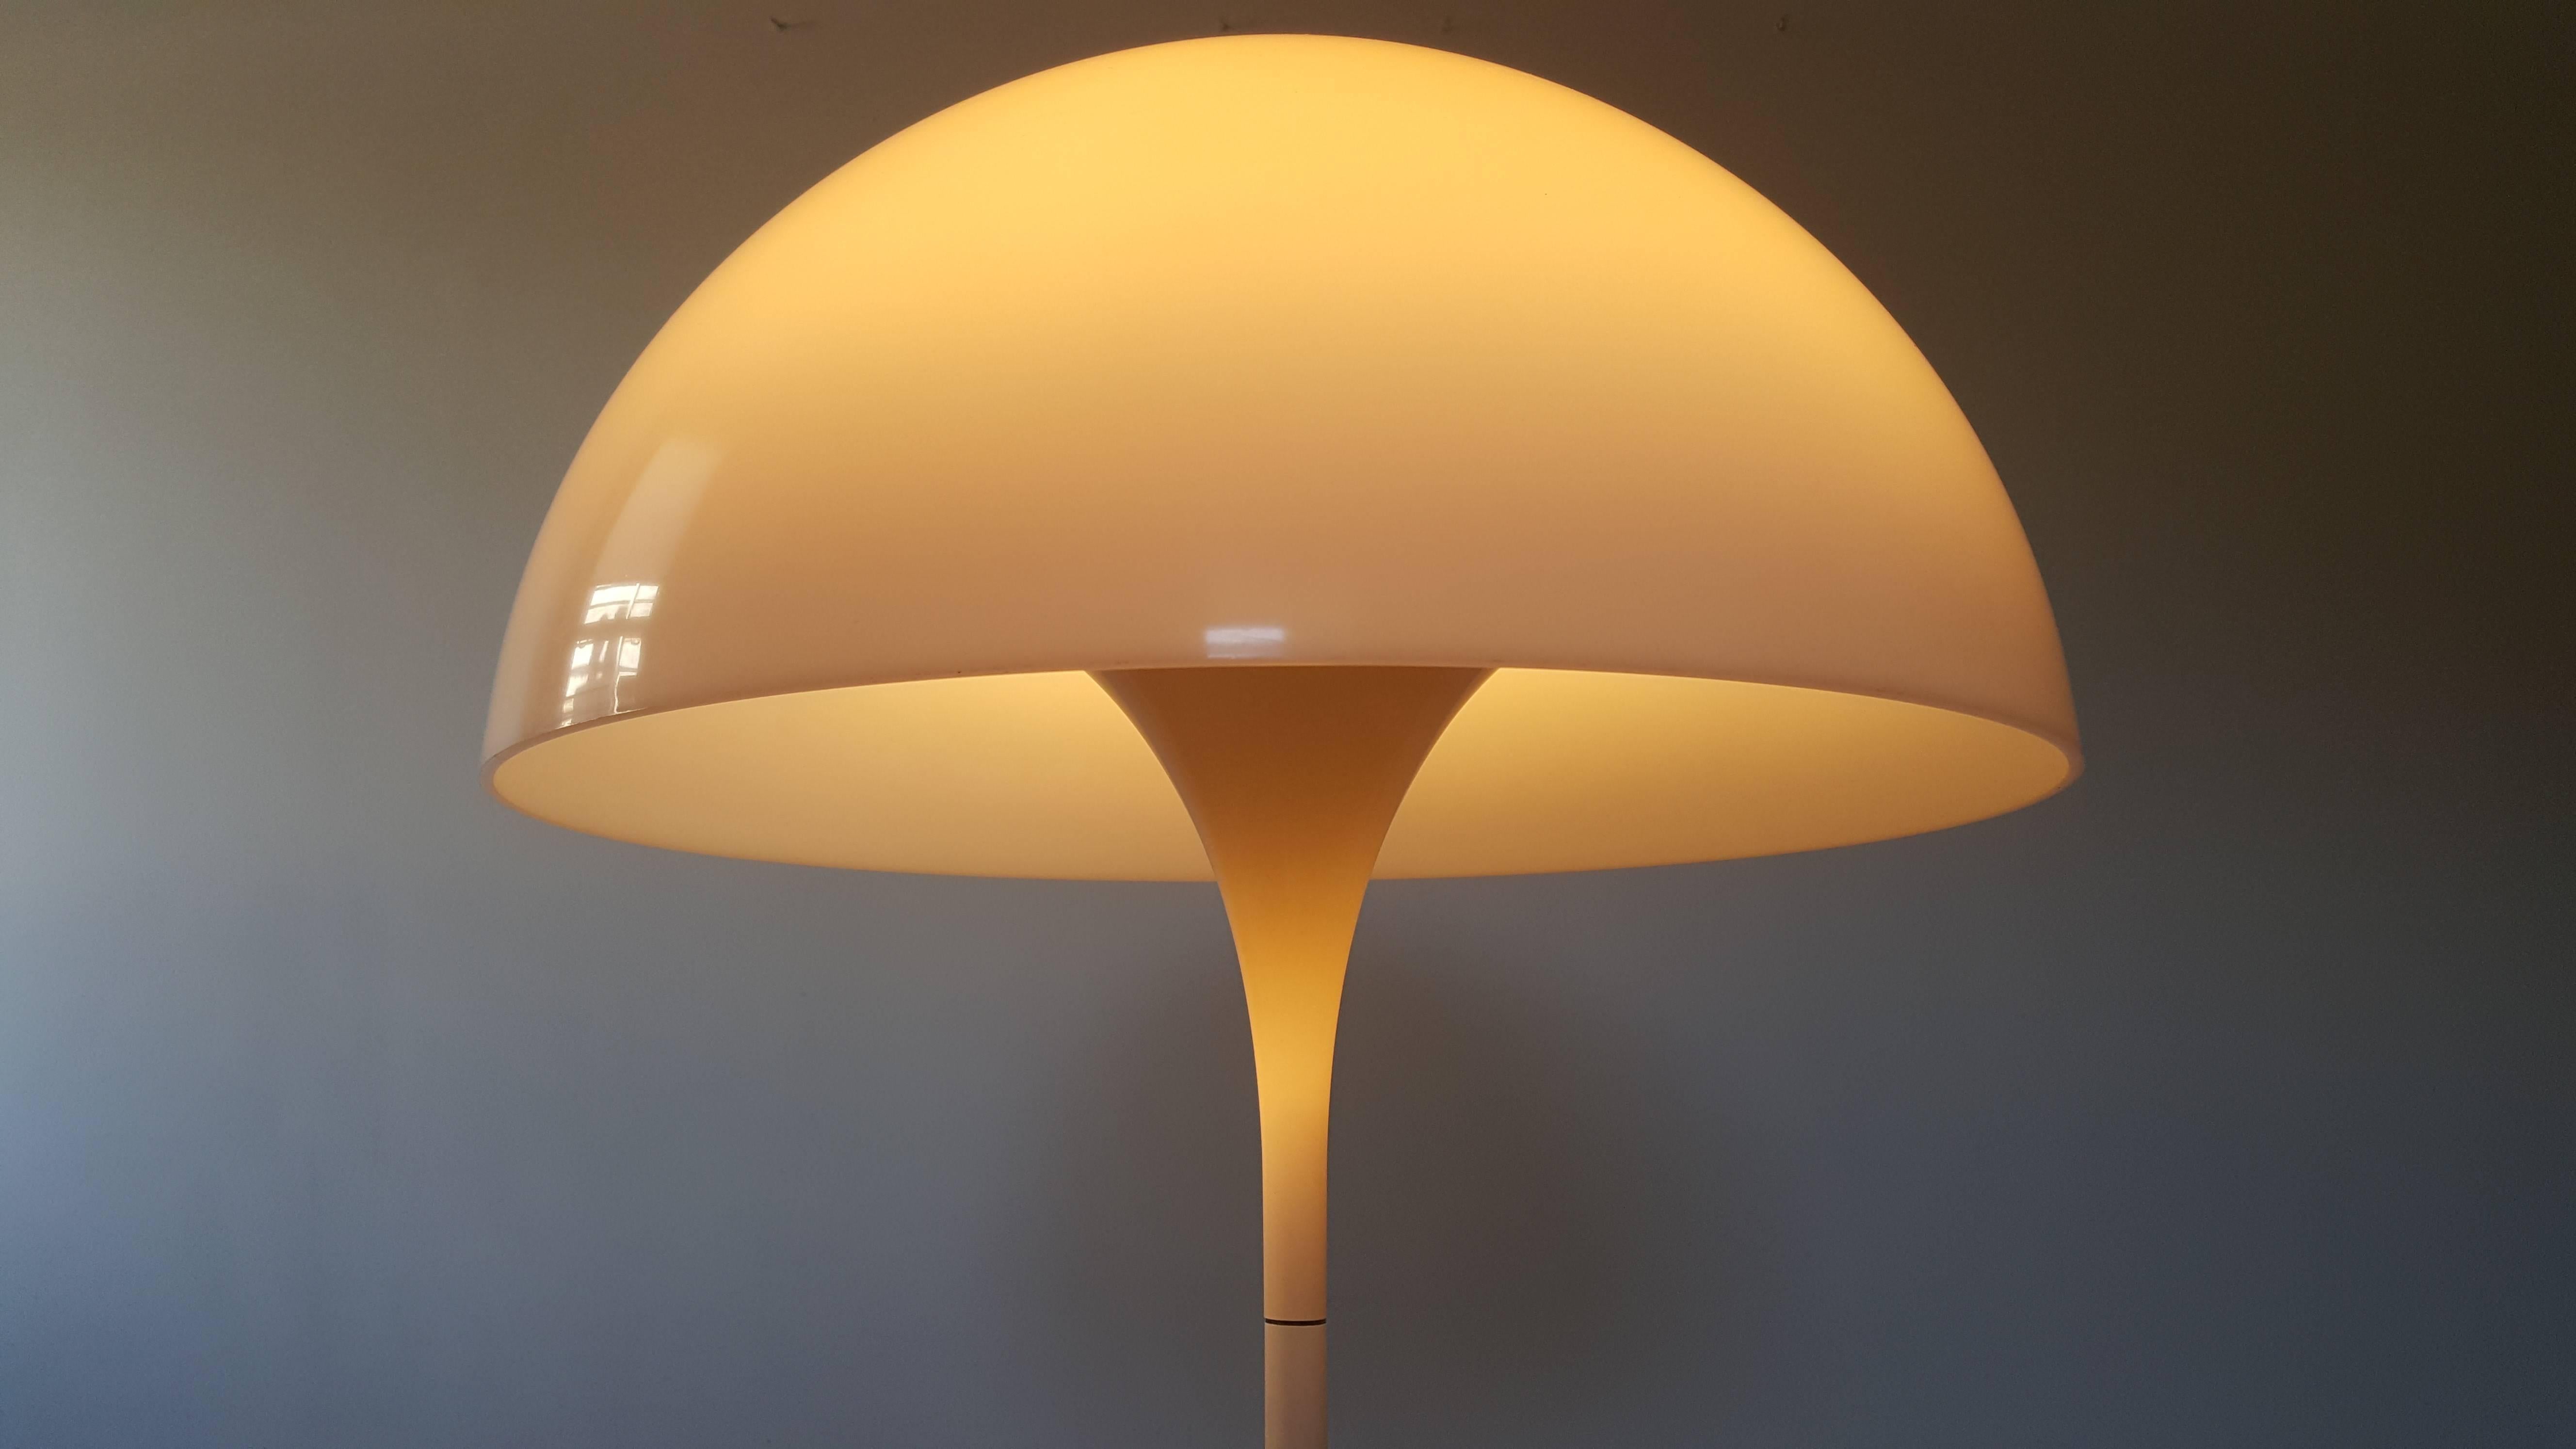 Original vintage Panthella floor lamp designed by Verner Panton 1971 for Louis Poulsen

The famous Panthella floor lamp was designed by Verner Panton in 1971 and manufactured by Louis Poulsen.
 
Consisting of a moulded acrylic dome shade and